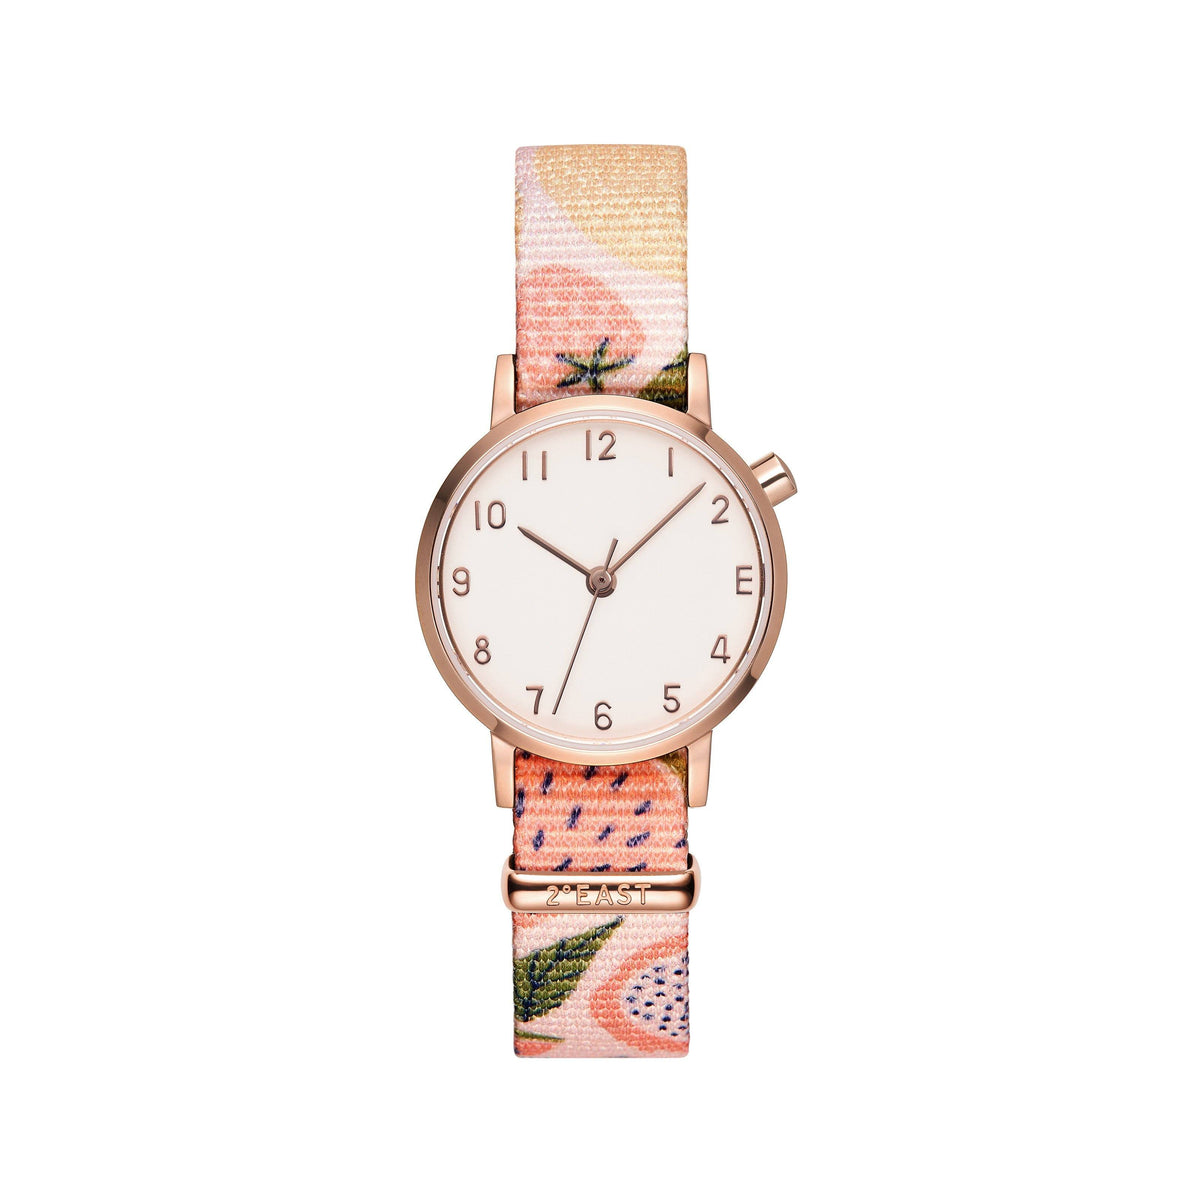 The White and Rose Gold Watch - Fruity (Kids)